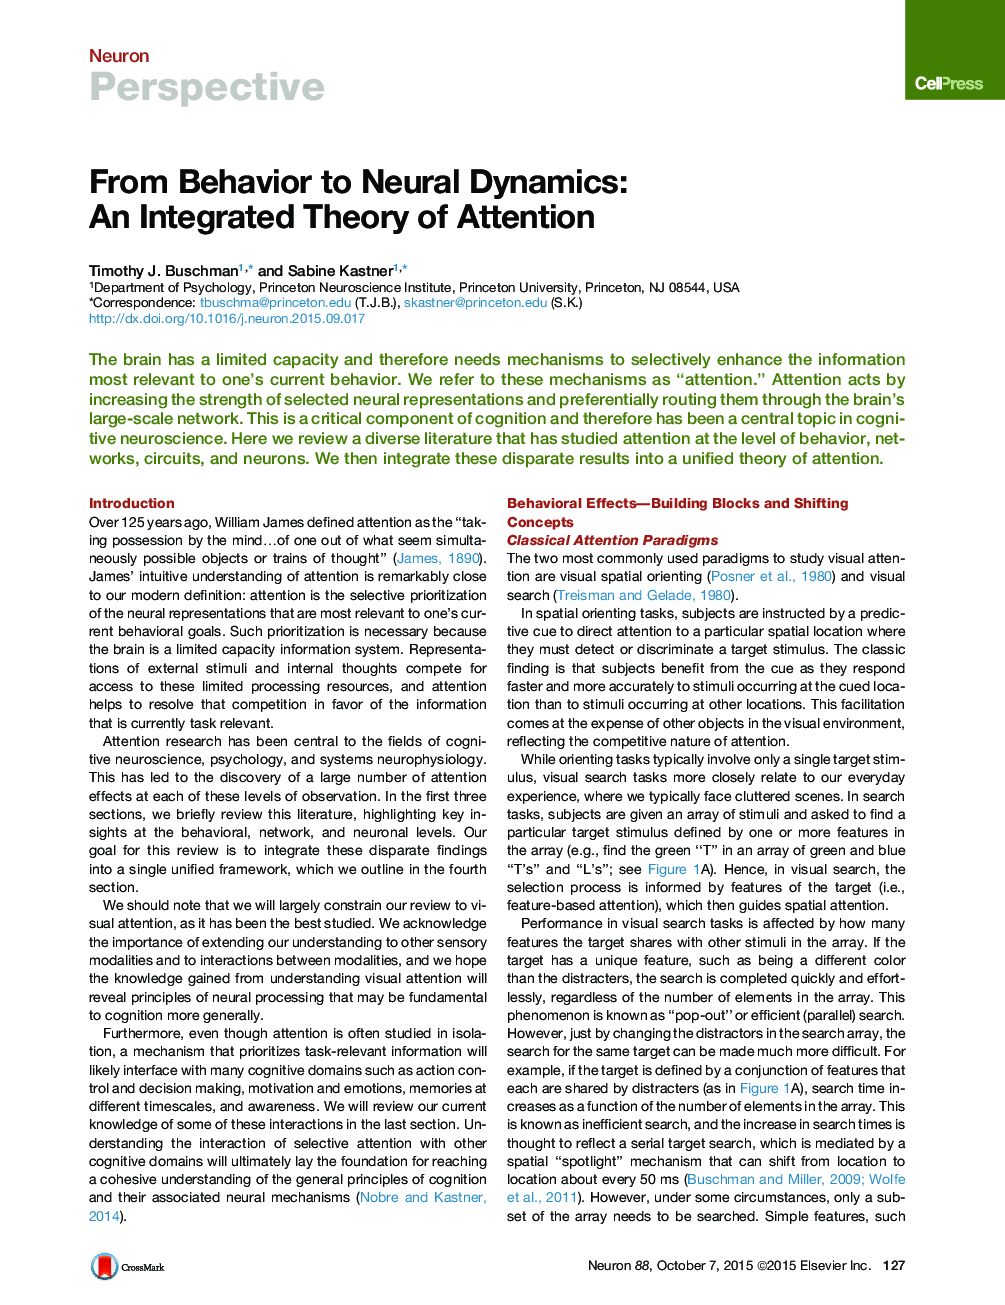 From Behavior to Neural Dynamics: An Integrated Theory of Attention